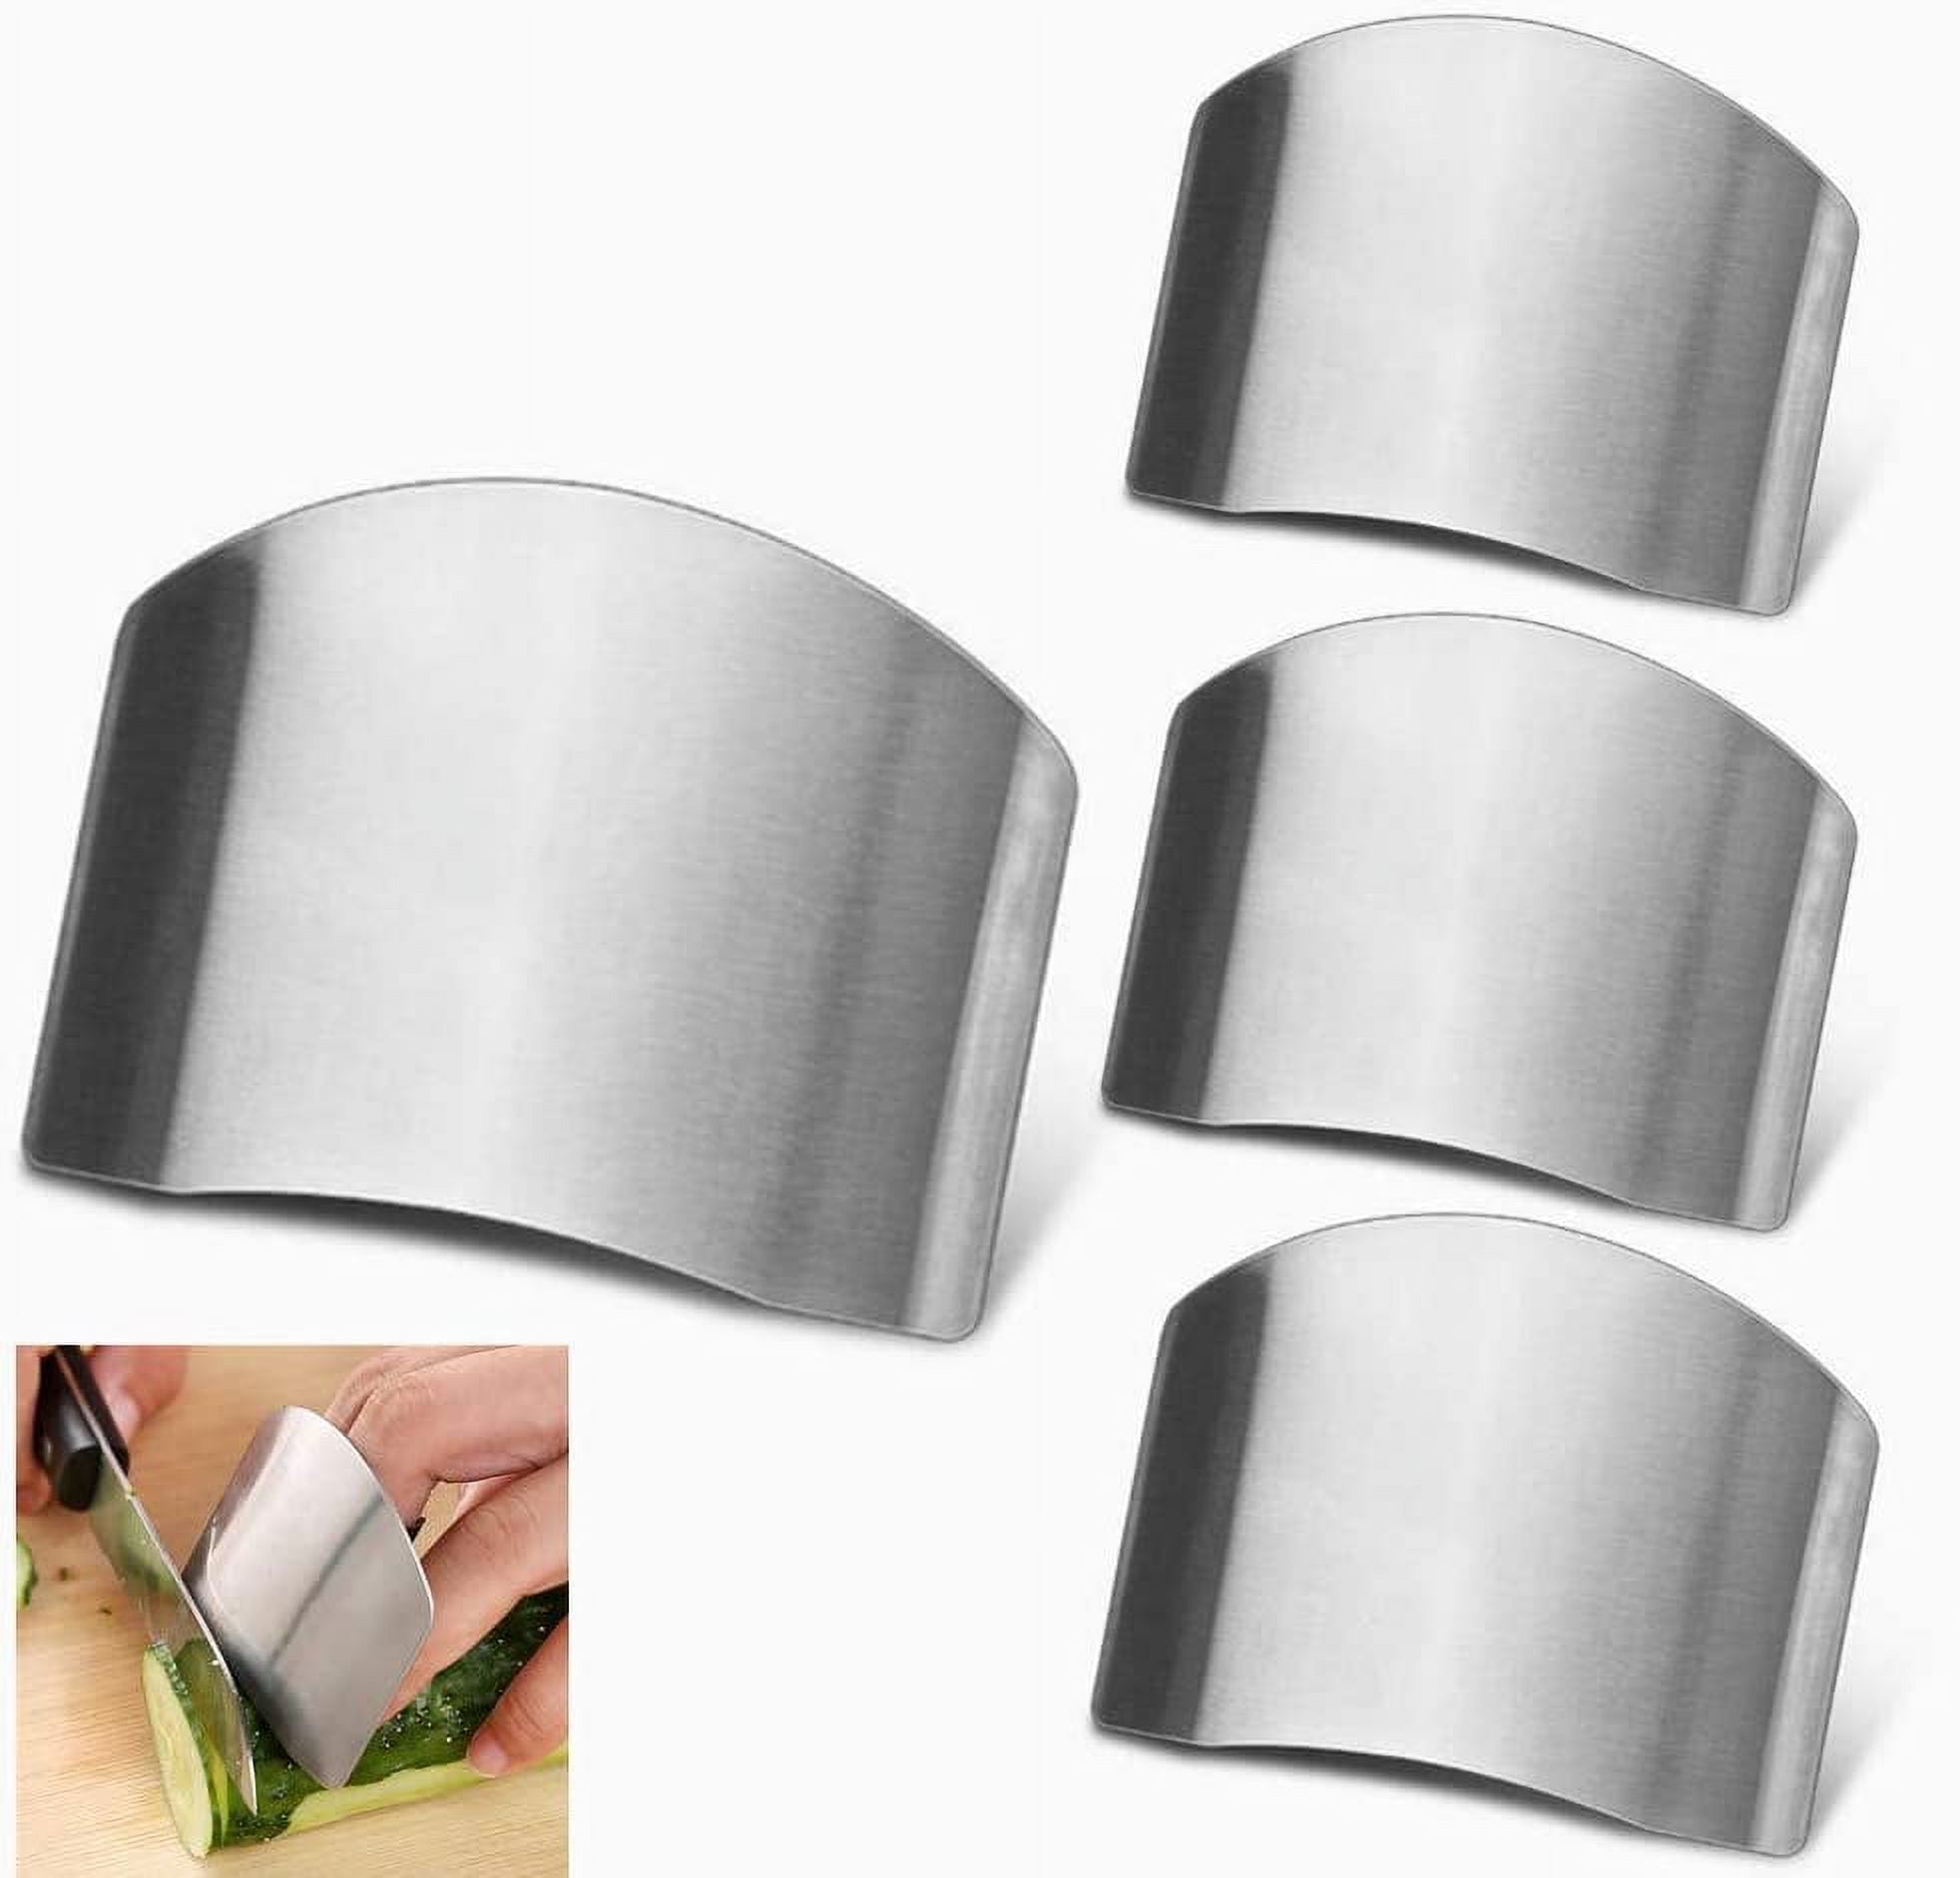 Stainless Steel Finger Hand Protector, 3PCS Stainless Steel Finger Guard  for Cutting Food, Premium Finger Shield Knife Cutting Protector Slicing  Tool